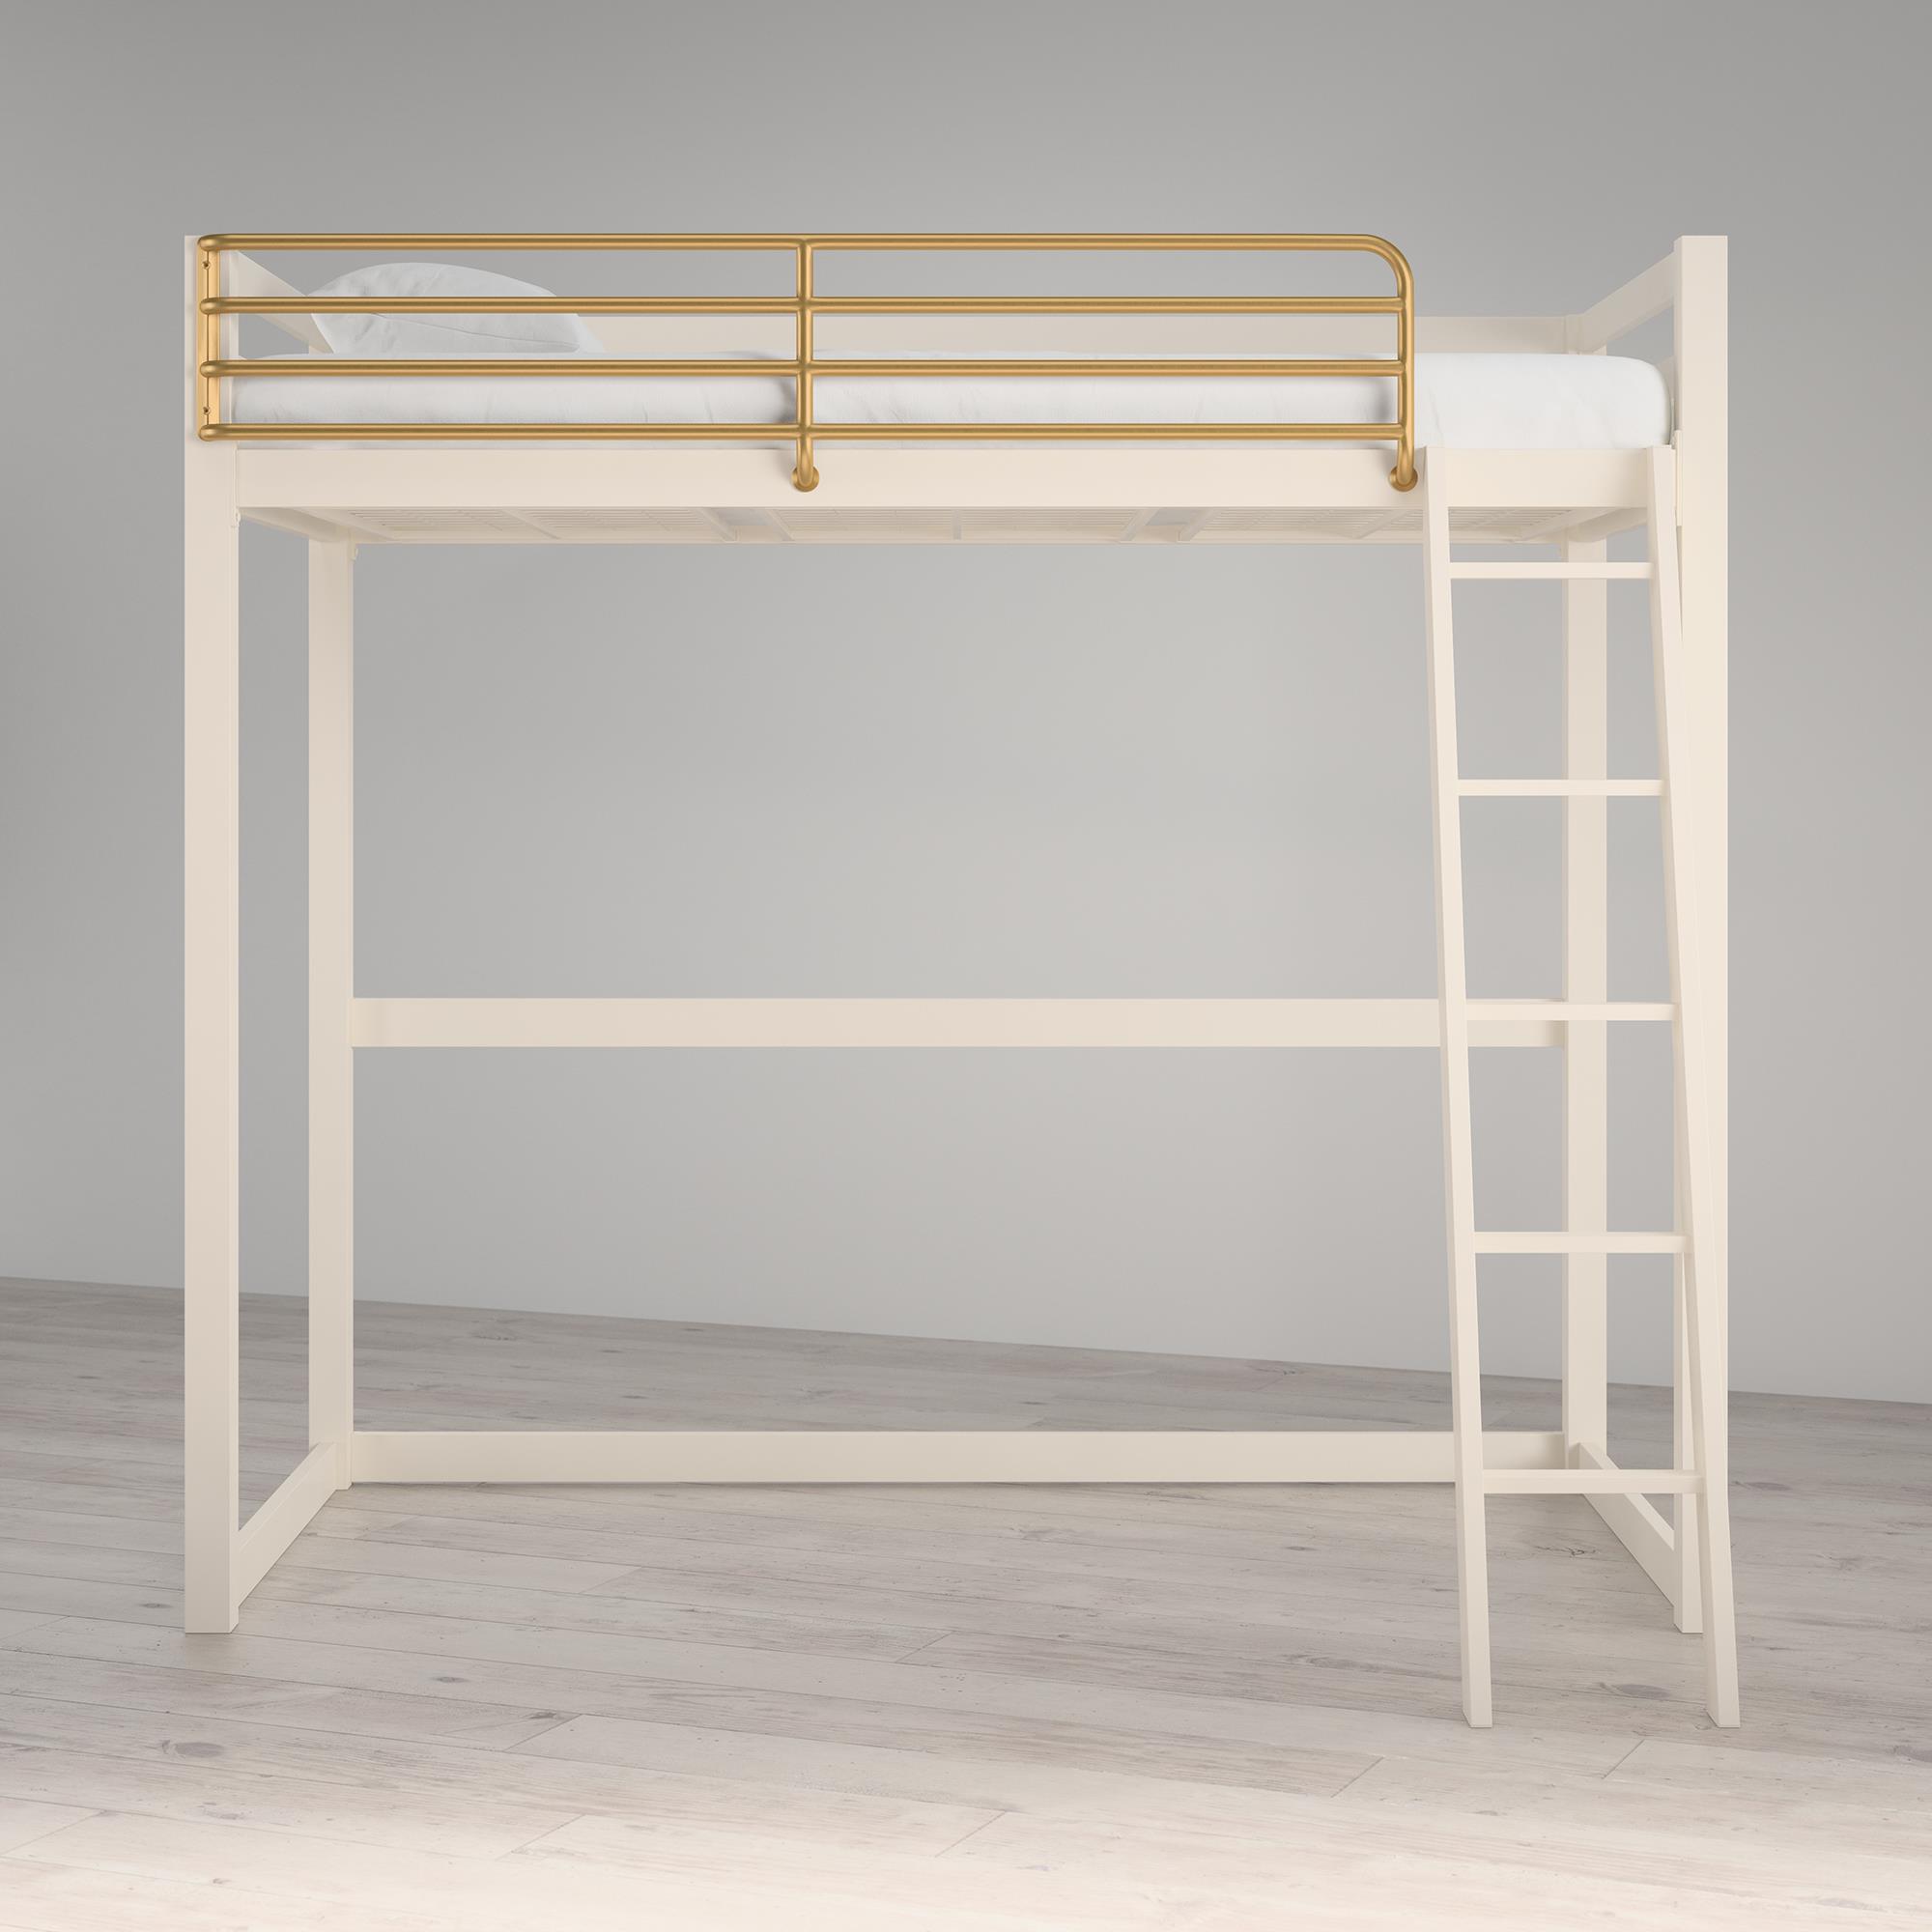 Little Seeds Monarch Hill Haven Twin Metal Loft Bed, White & Gold Bars - image 3 of 12